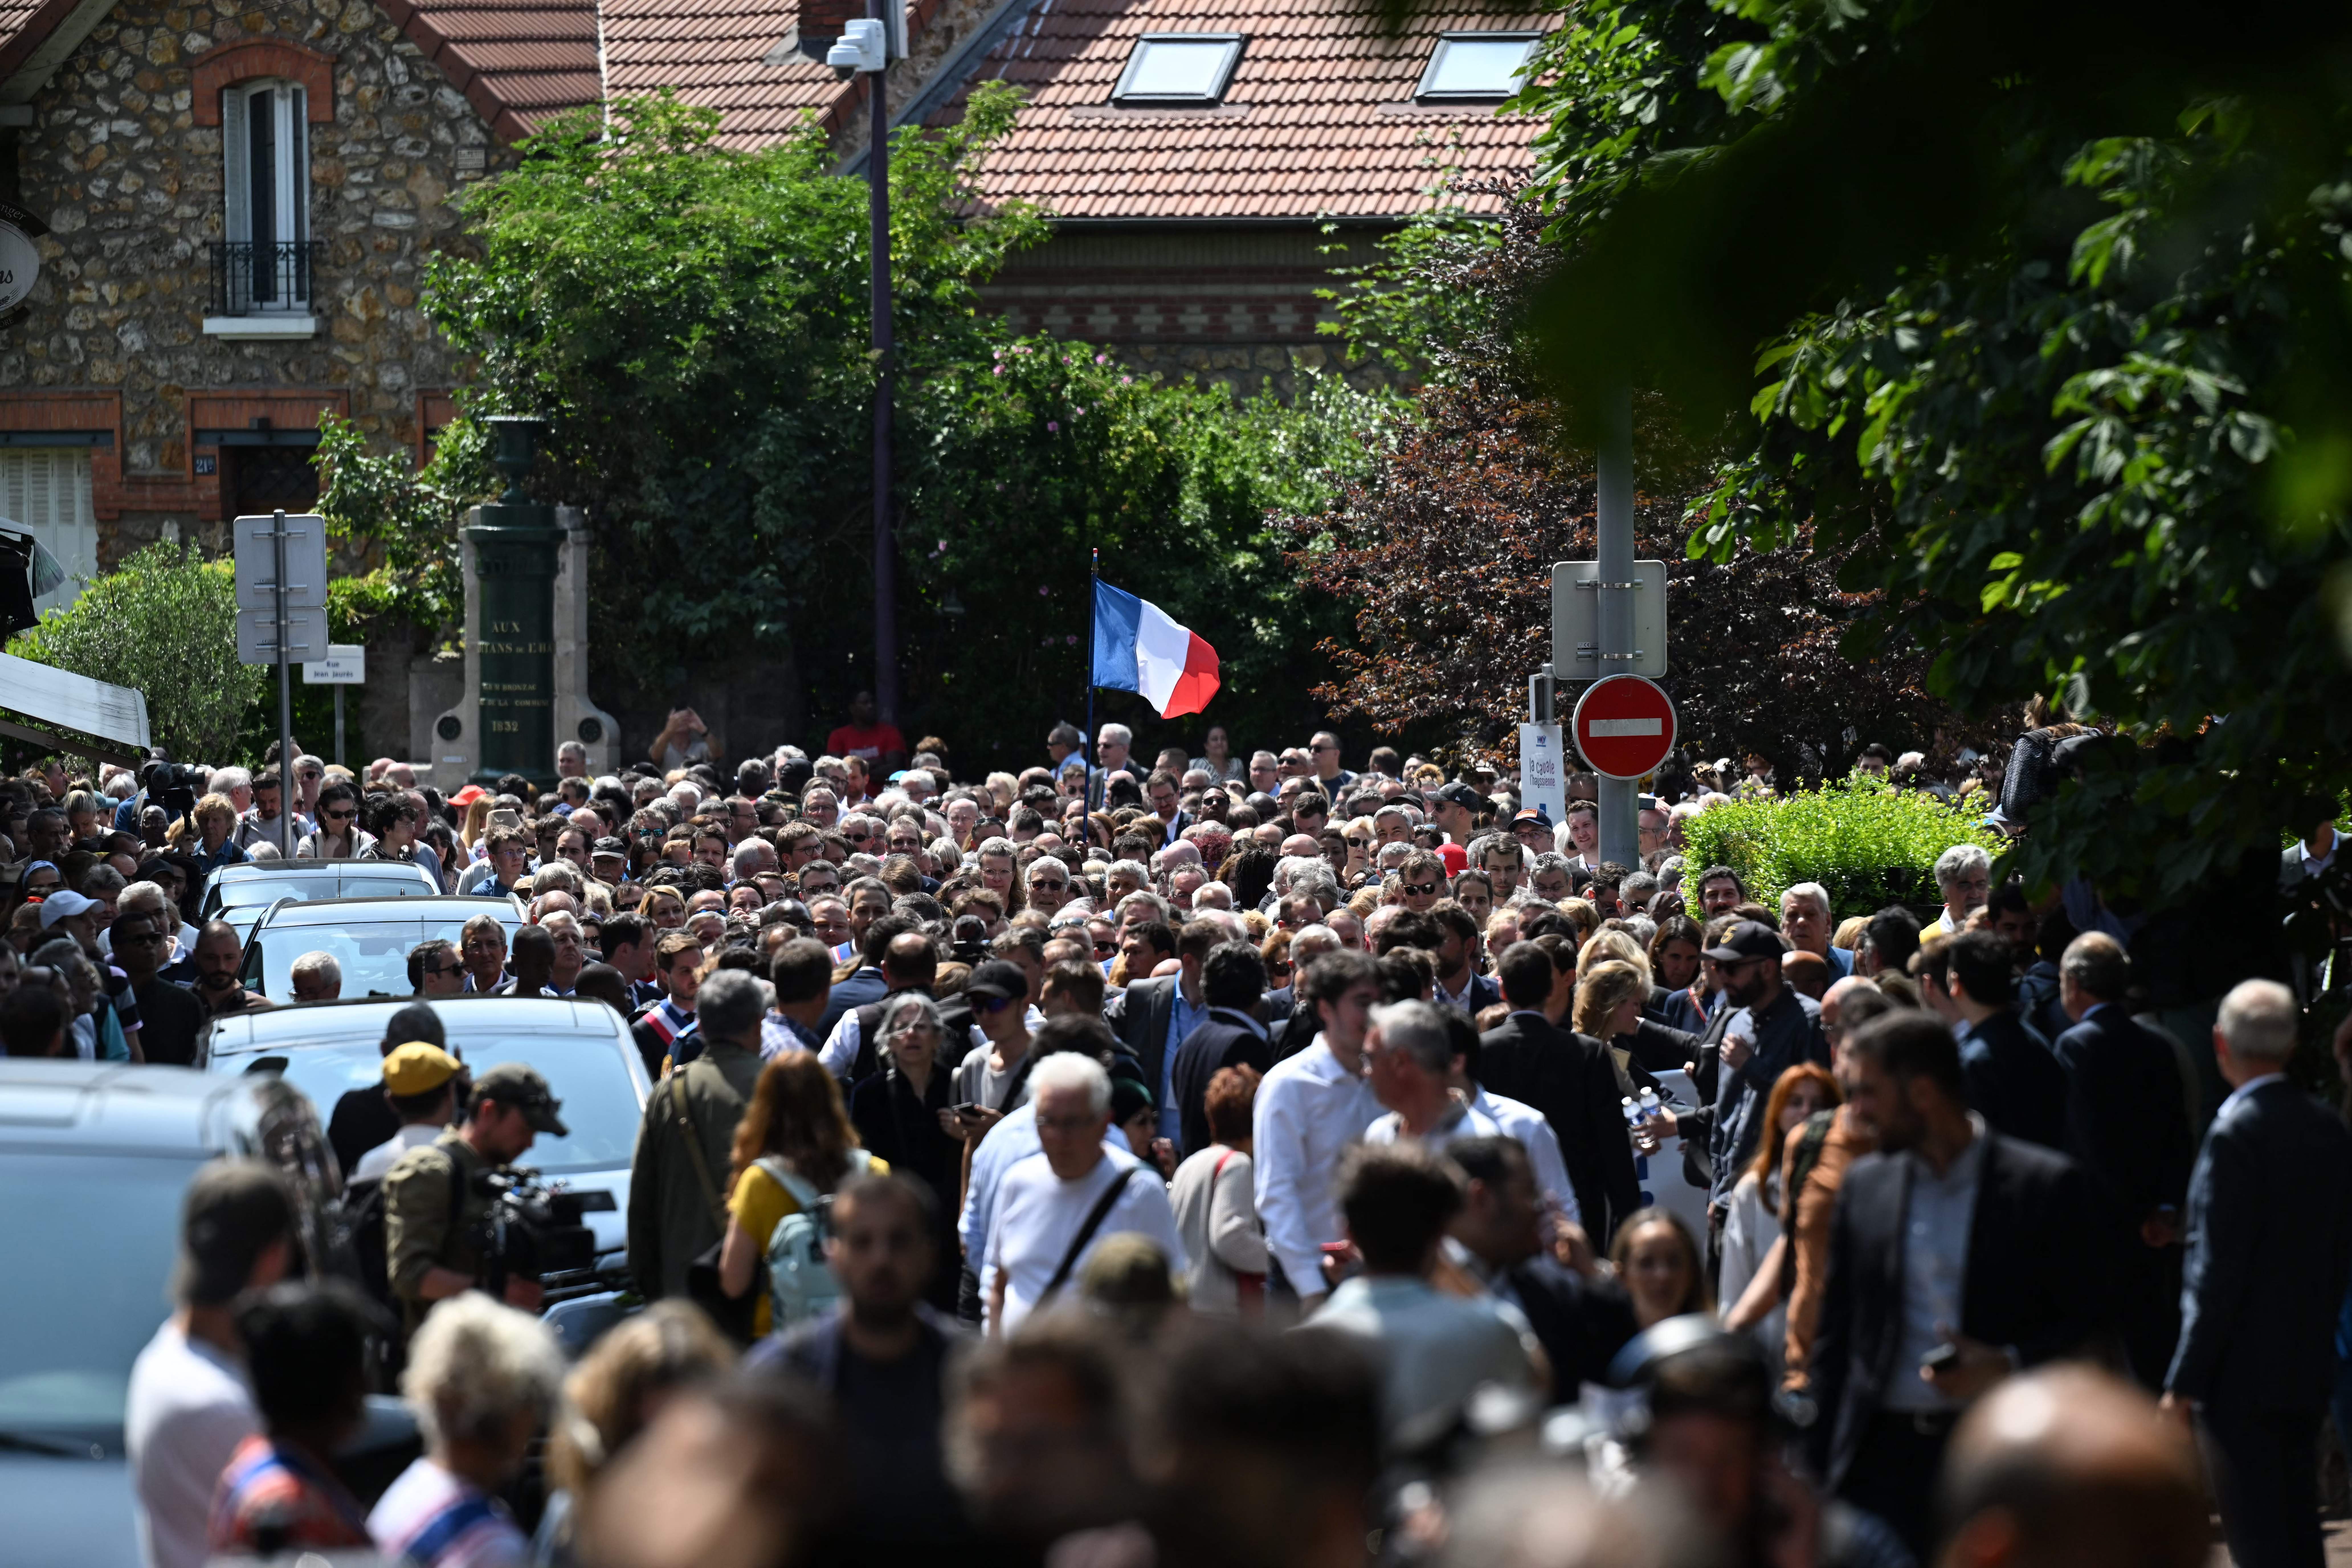 Participants attend a nationwide action in front of town halls, after rioters rammed a vehicle into the Mayor’s house injuring his wife and one of his children overnight, in L’Hay-les-Roses, south of Paris, on 3 July 2023